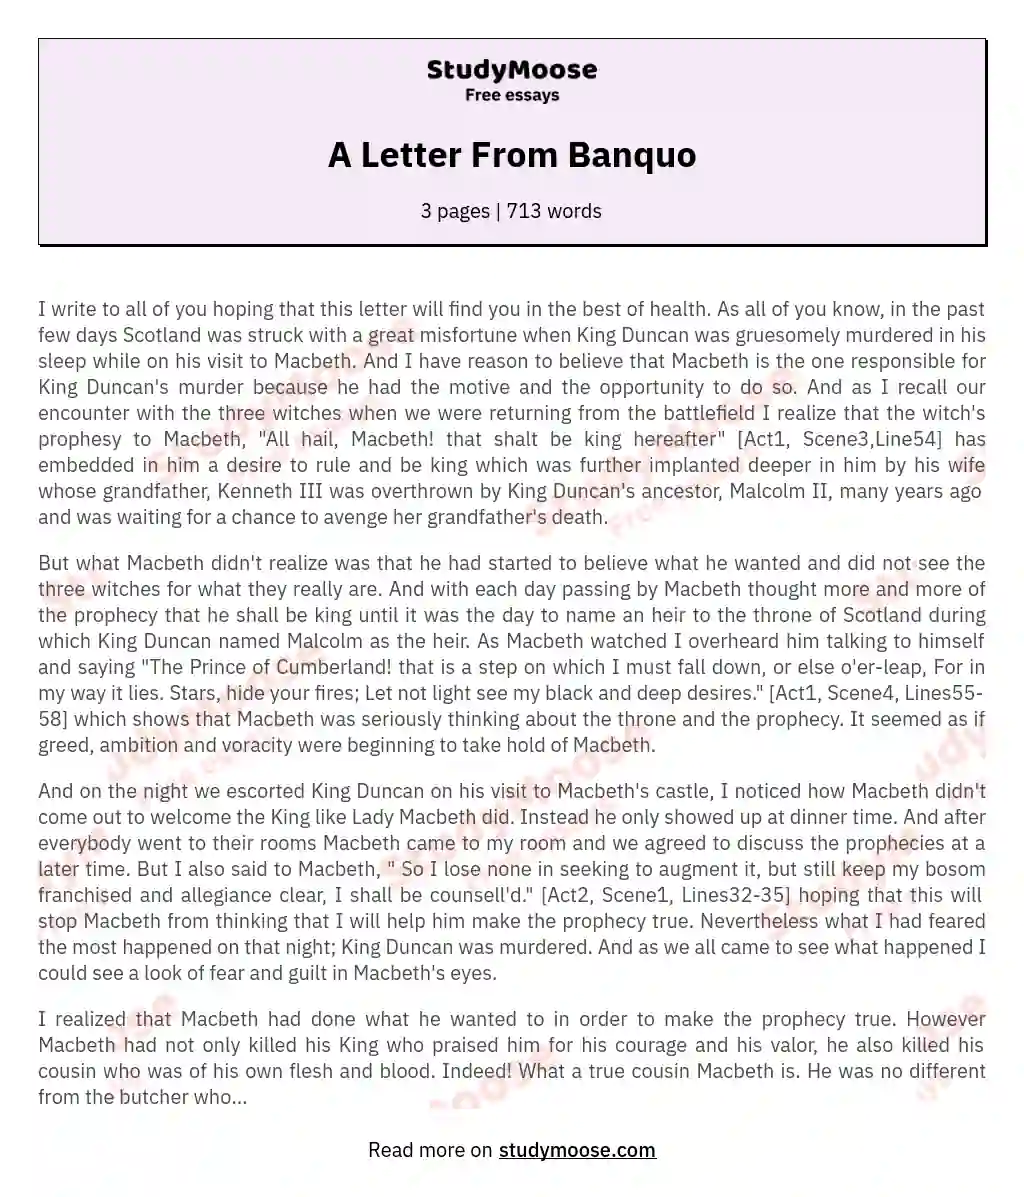 A Letter From Banquo essay